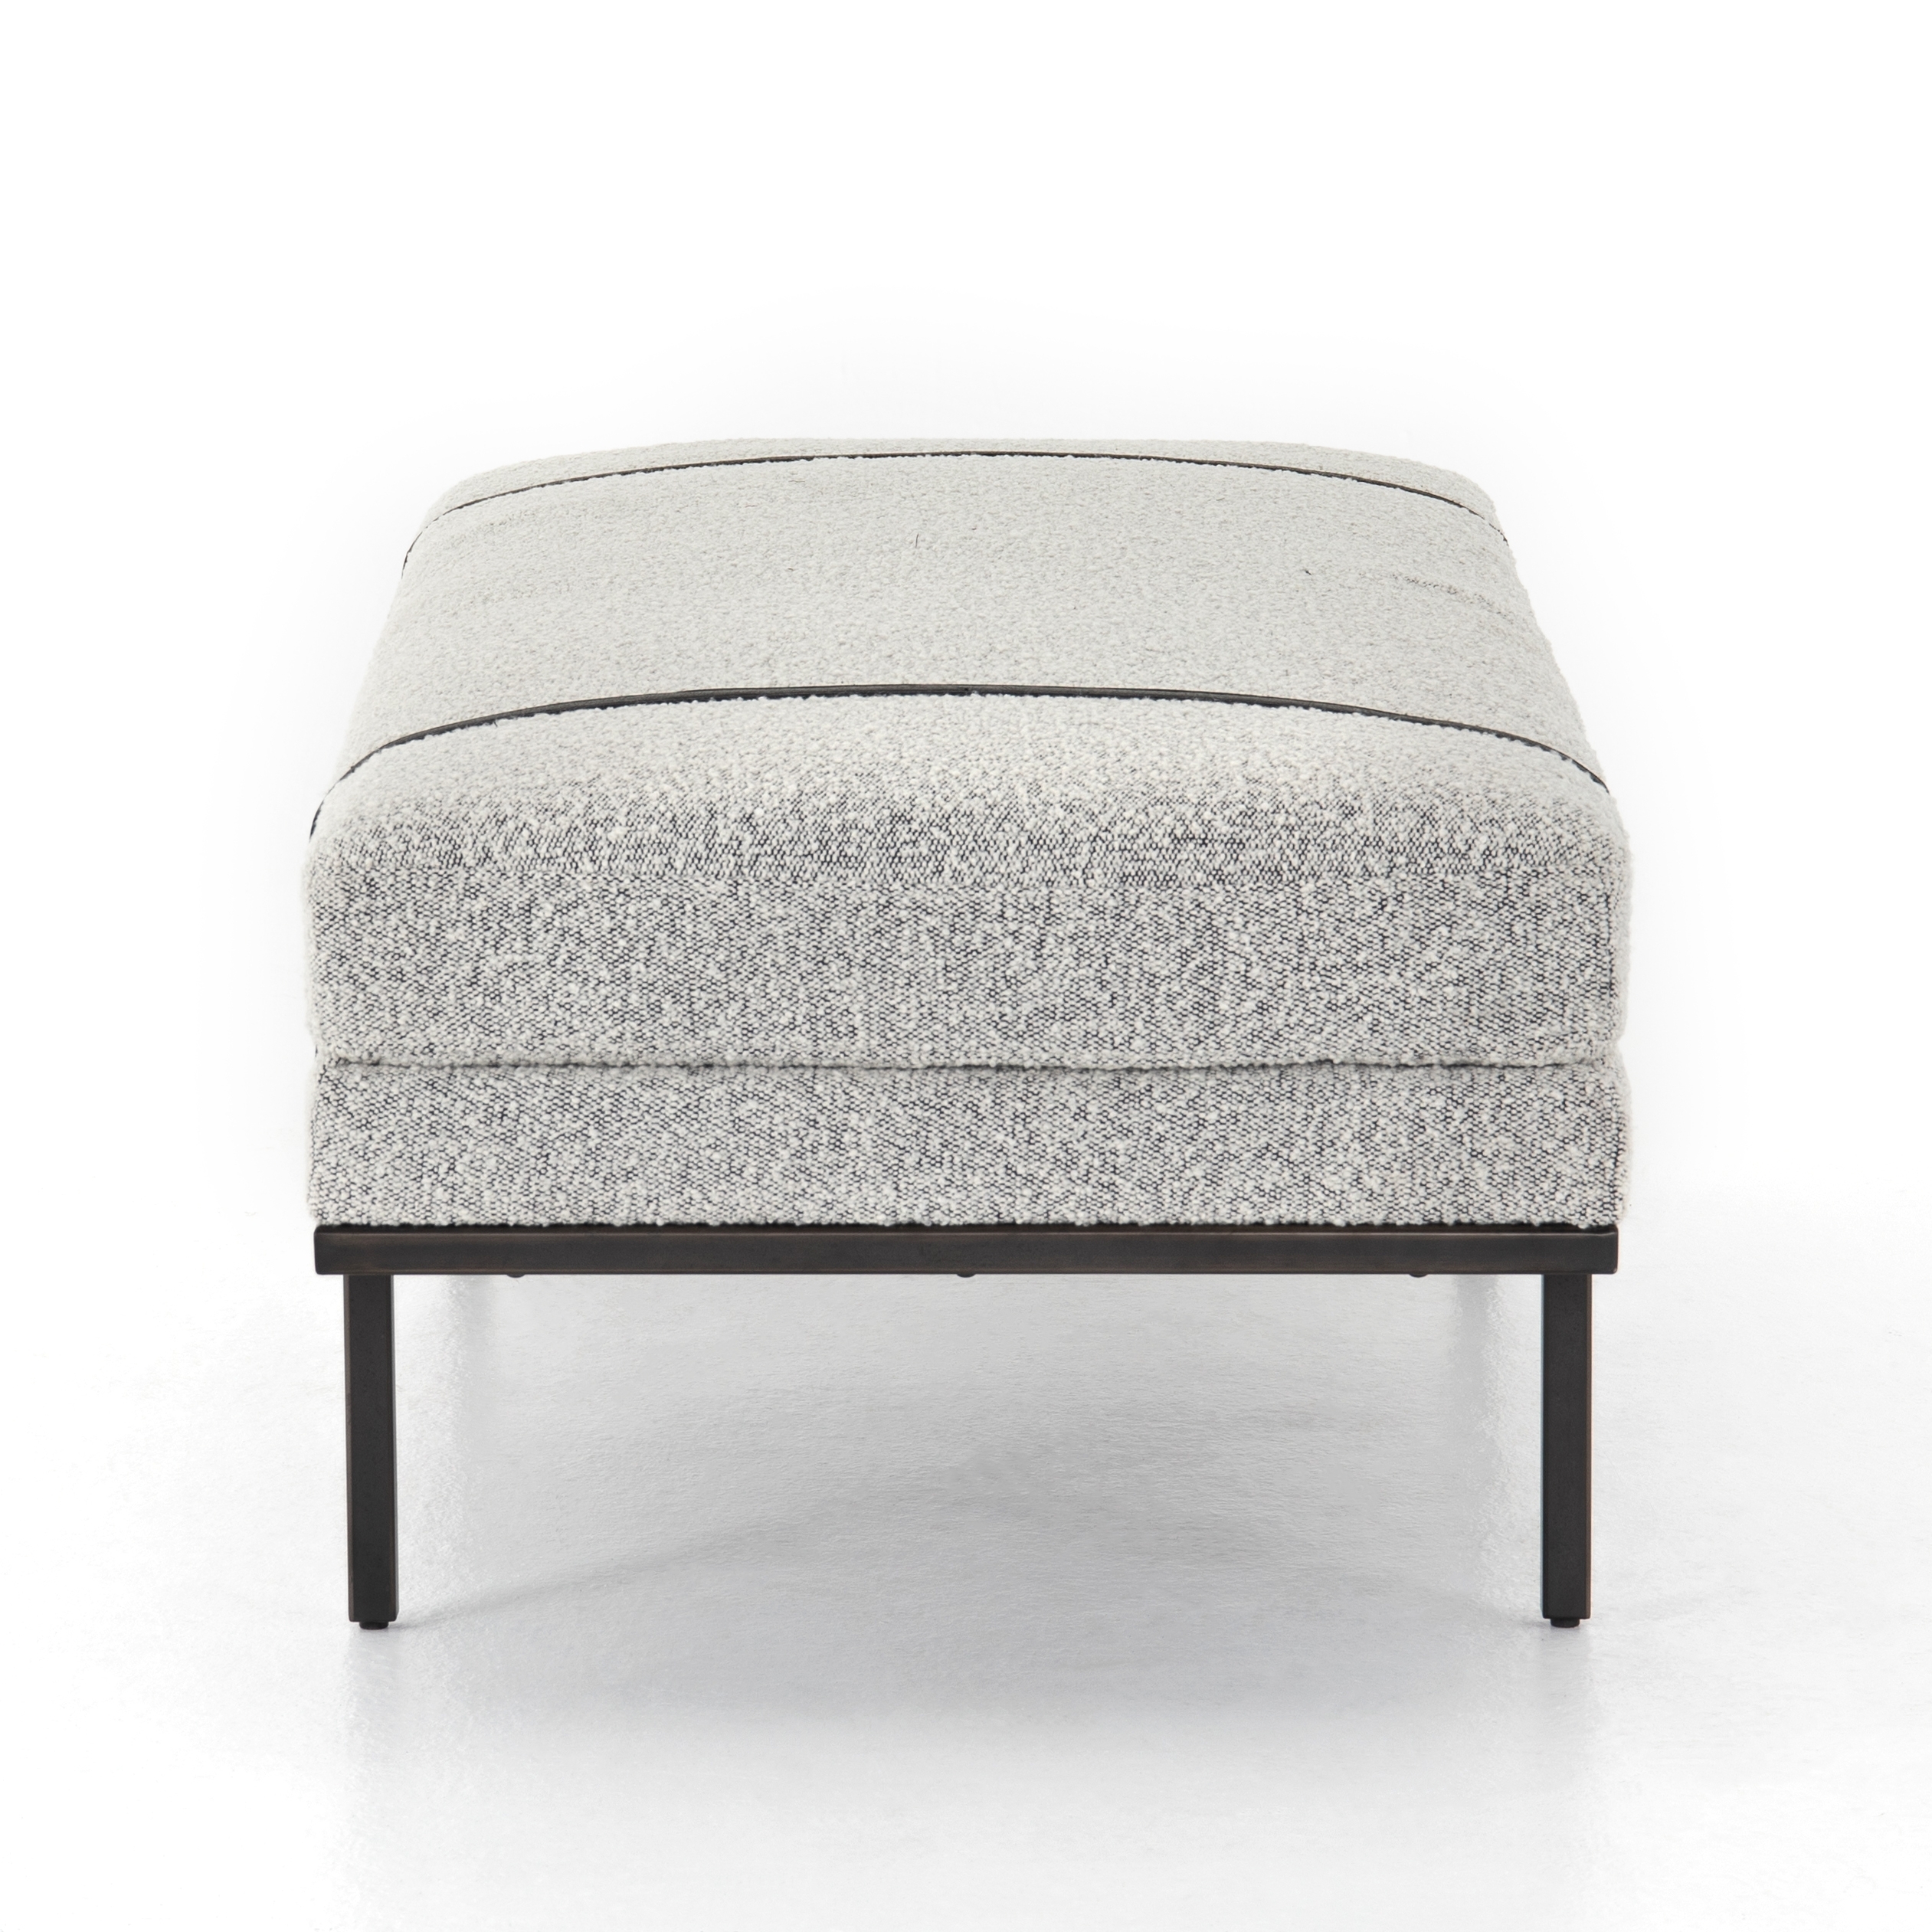 Harris Accent Bench-Knoll Domino - Image 4